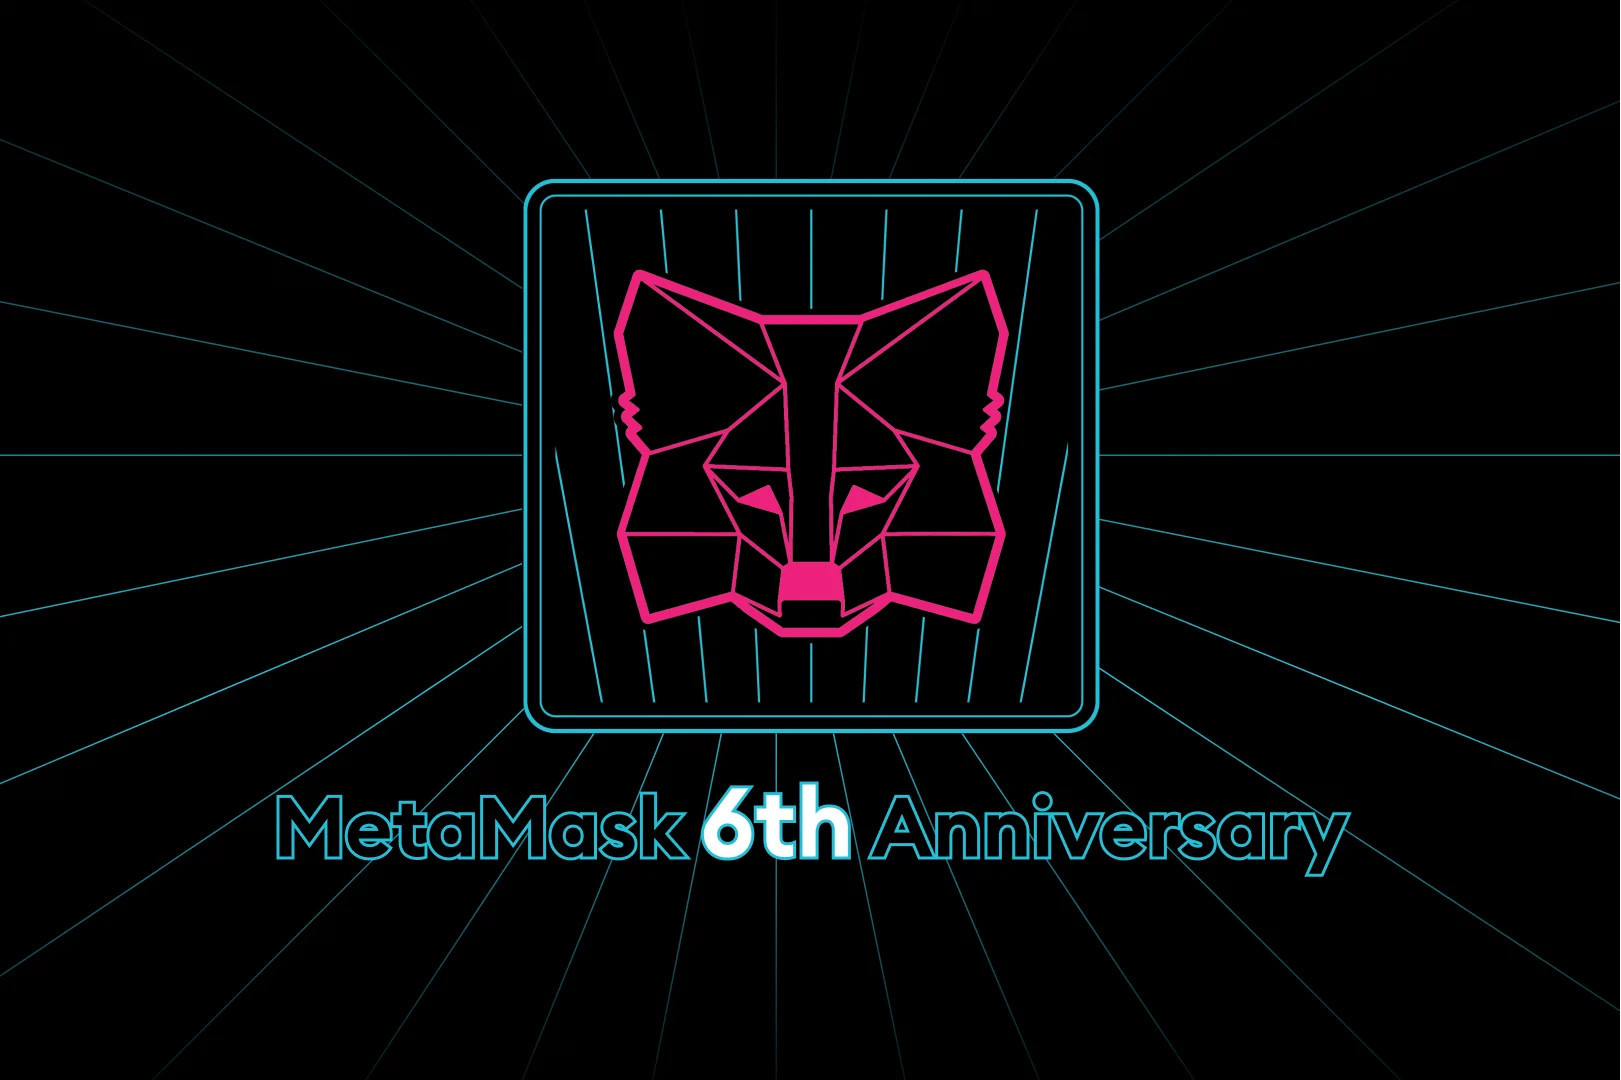 Image: MetaMask Celebrates Its 6th Anniversary With 6 Digit Growth & Strategic Update to the Market